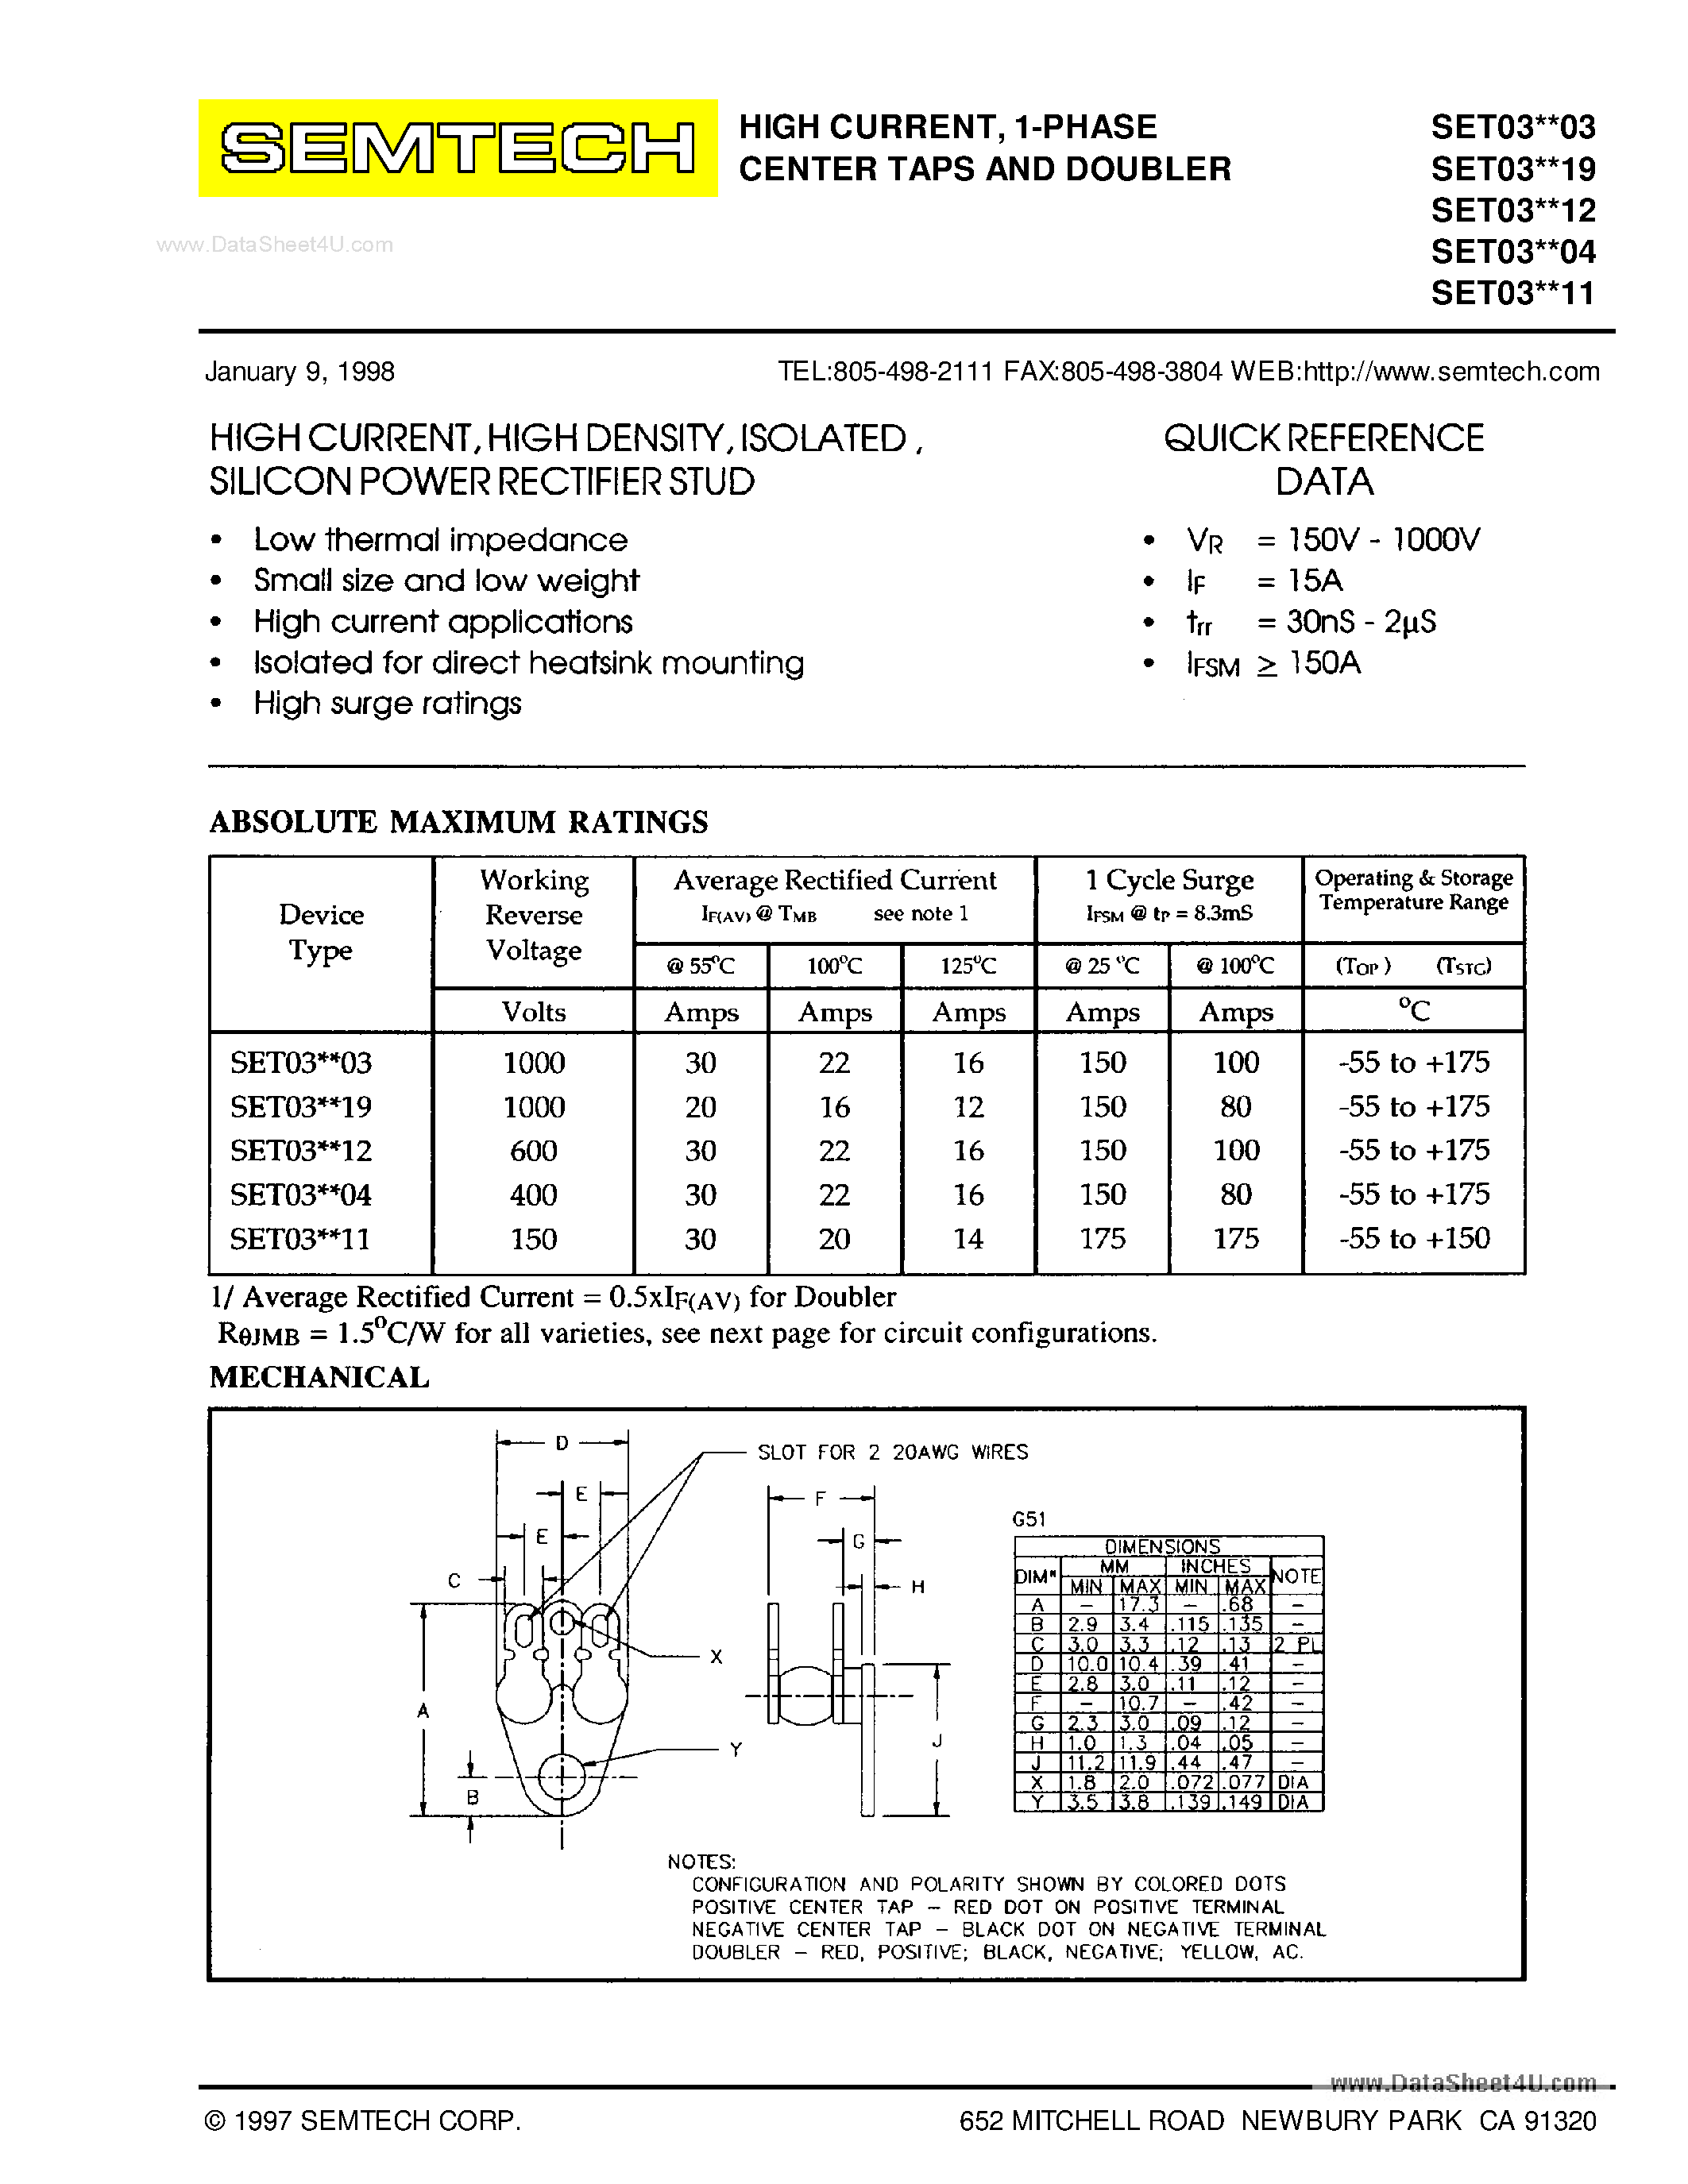 Datasheet SET030603 - (SET03xxxx) DO4 STUD HIGH CURRENT ISOLATED RECTIFIER ASSEMBLY page 1